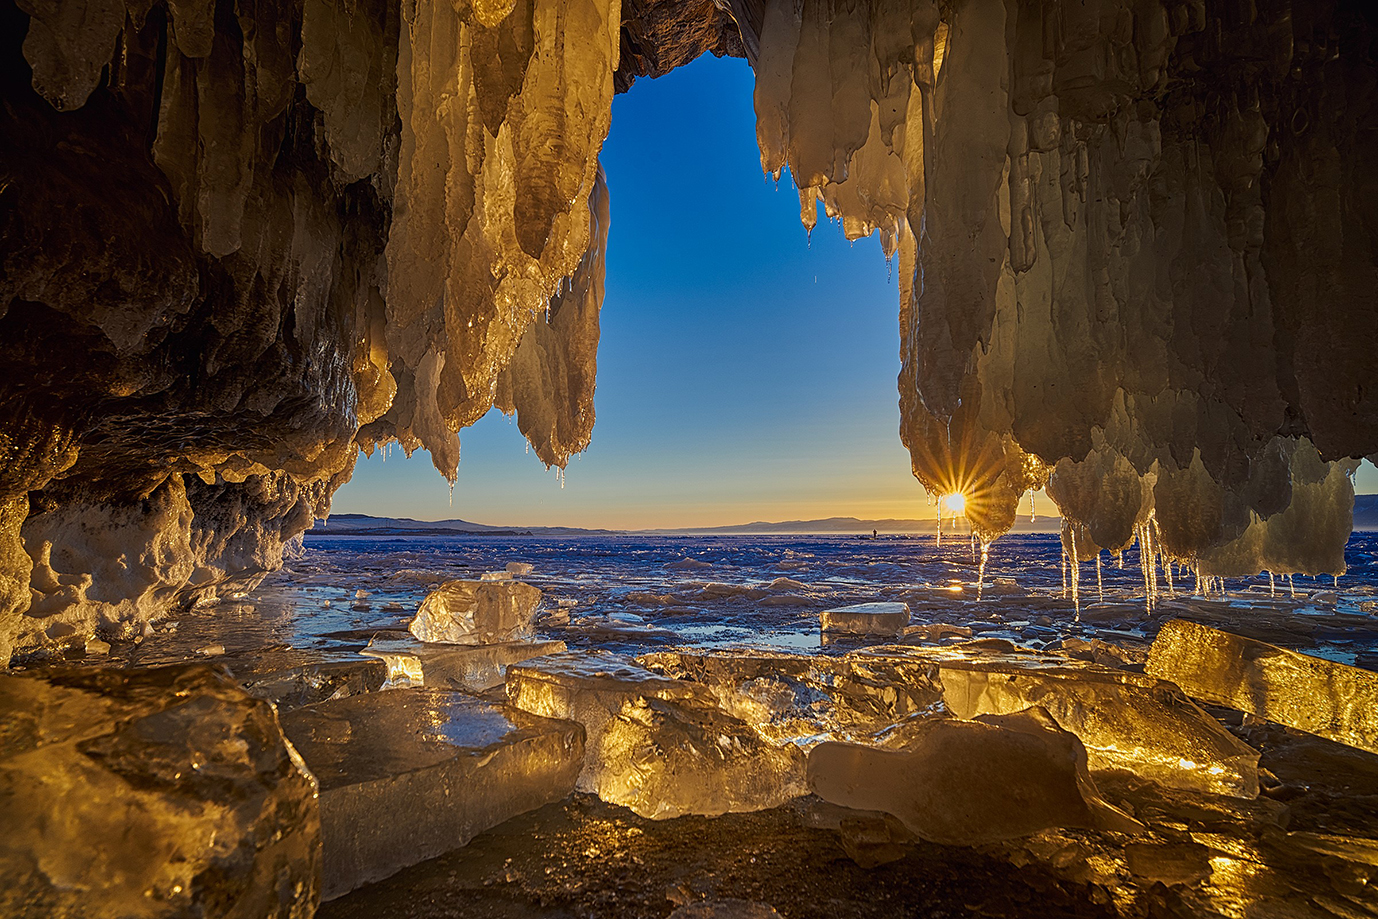 Sunset with starburst shot from inside an ice cave